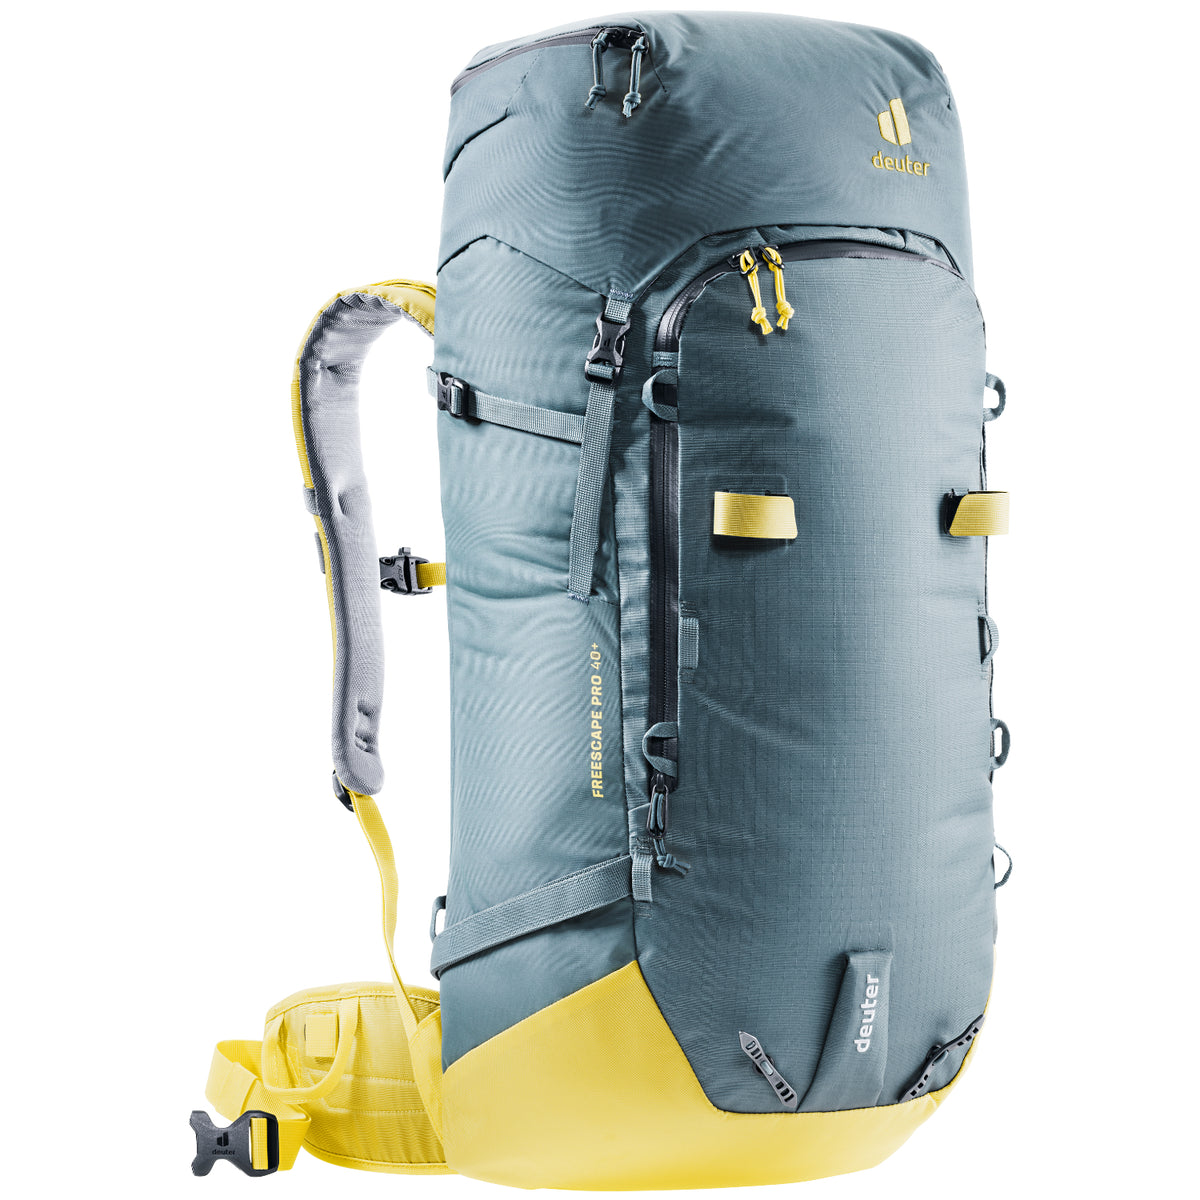 Deuter Freescape Pro 40+ rucksack in teal corn colour, from the front.